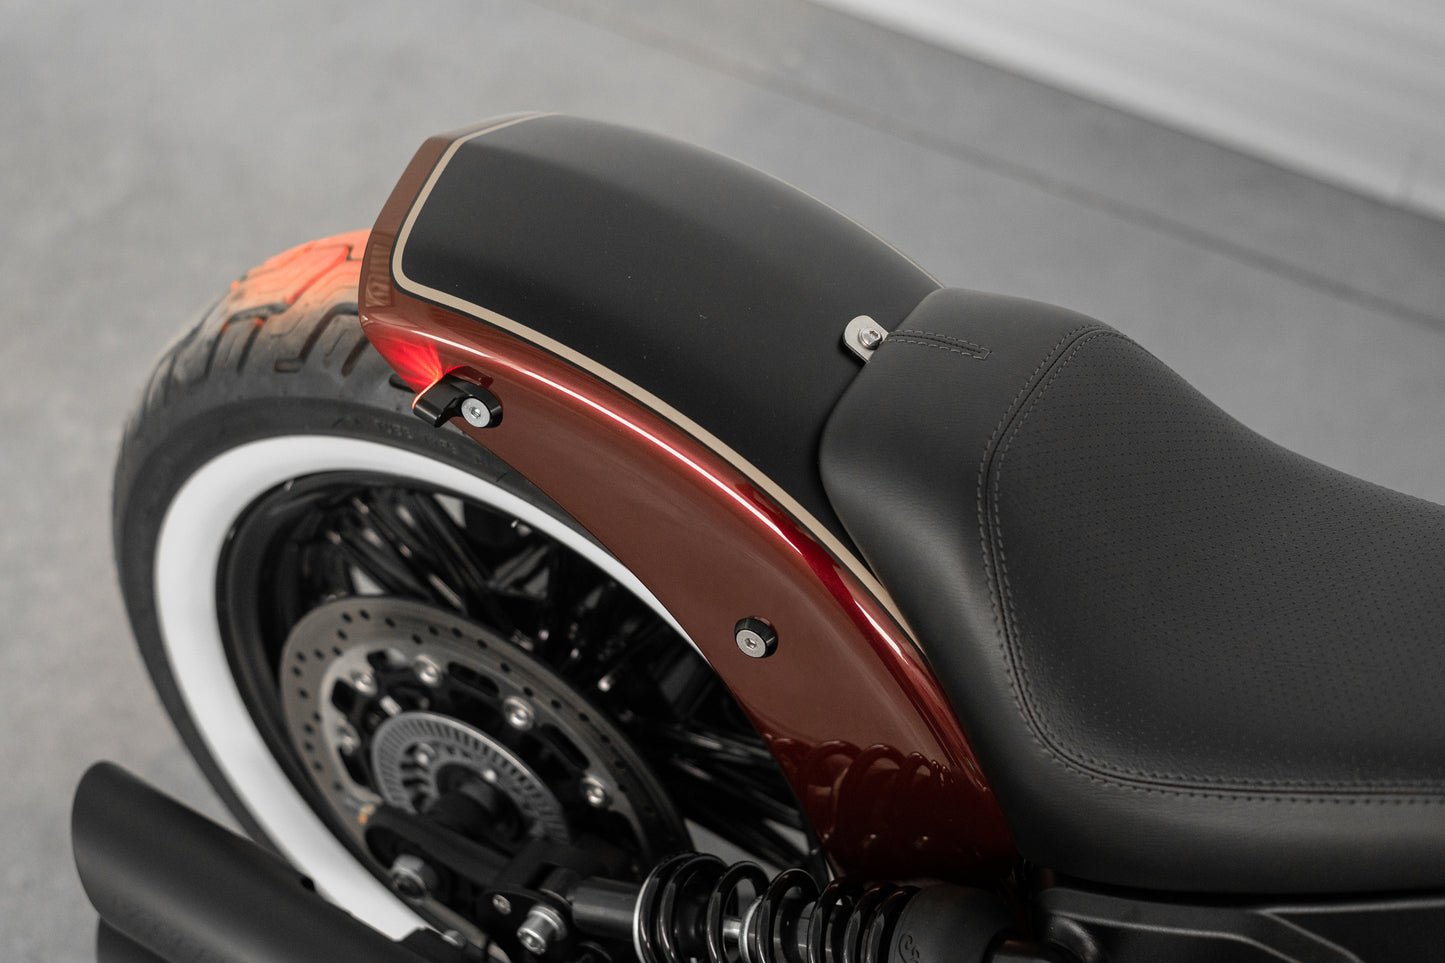 Harley Davidson motorcycle with Killer Custom "Tomahawk" rear fender from above grey background